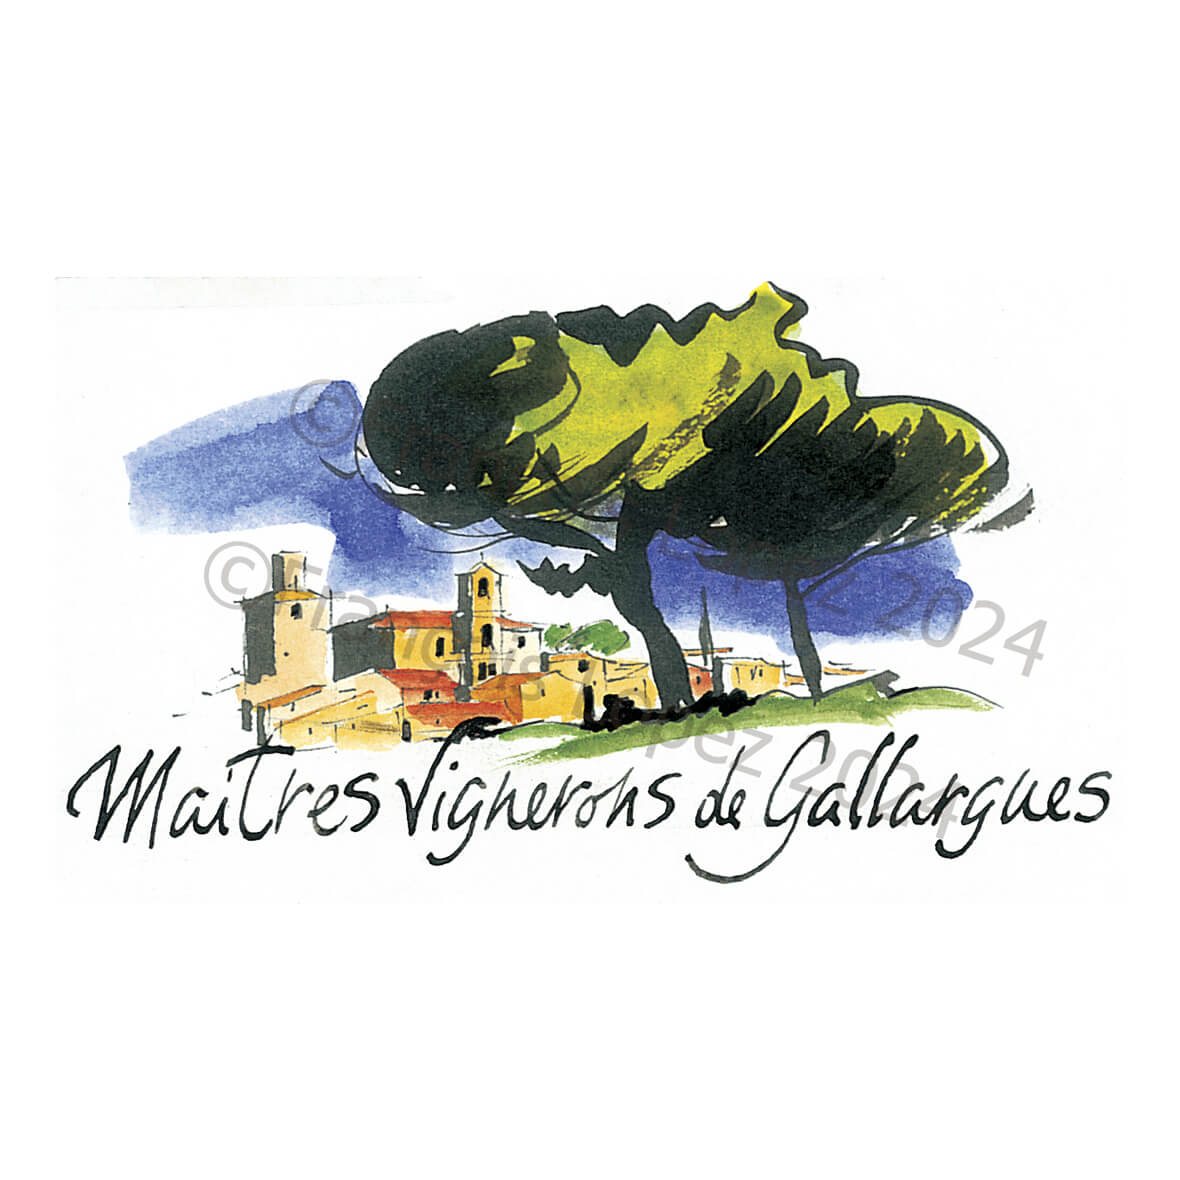 Wine cellar logo “Master winegrowers of Gallargues”